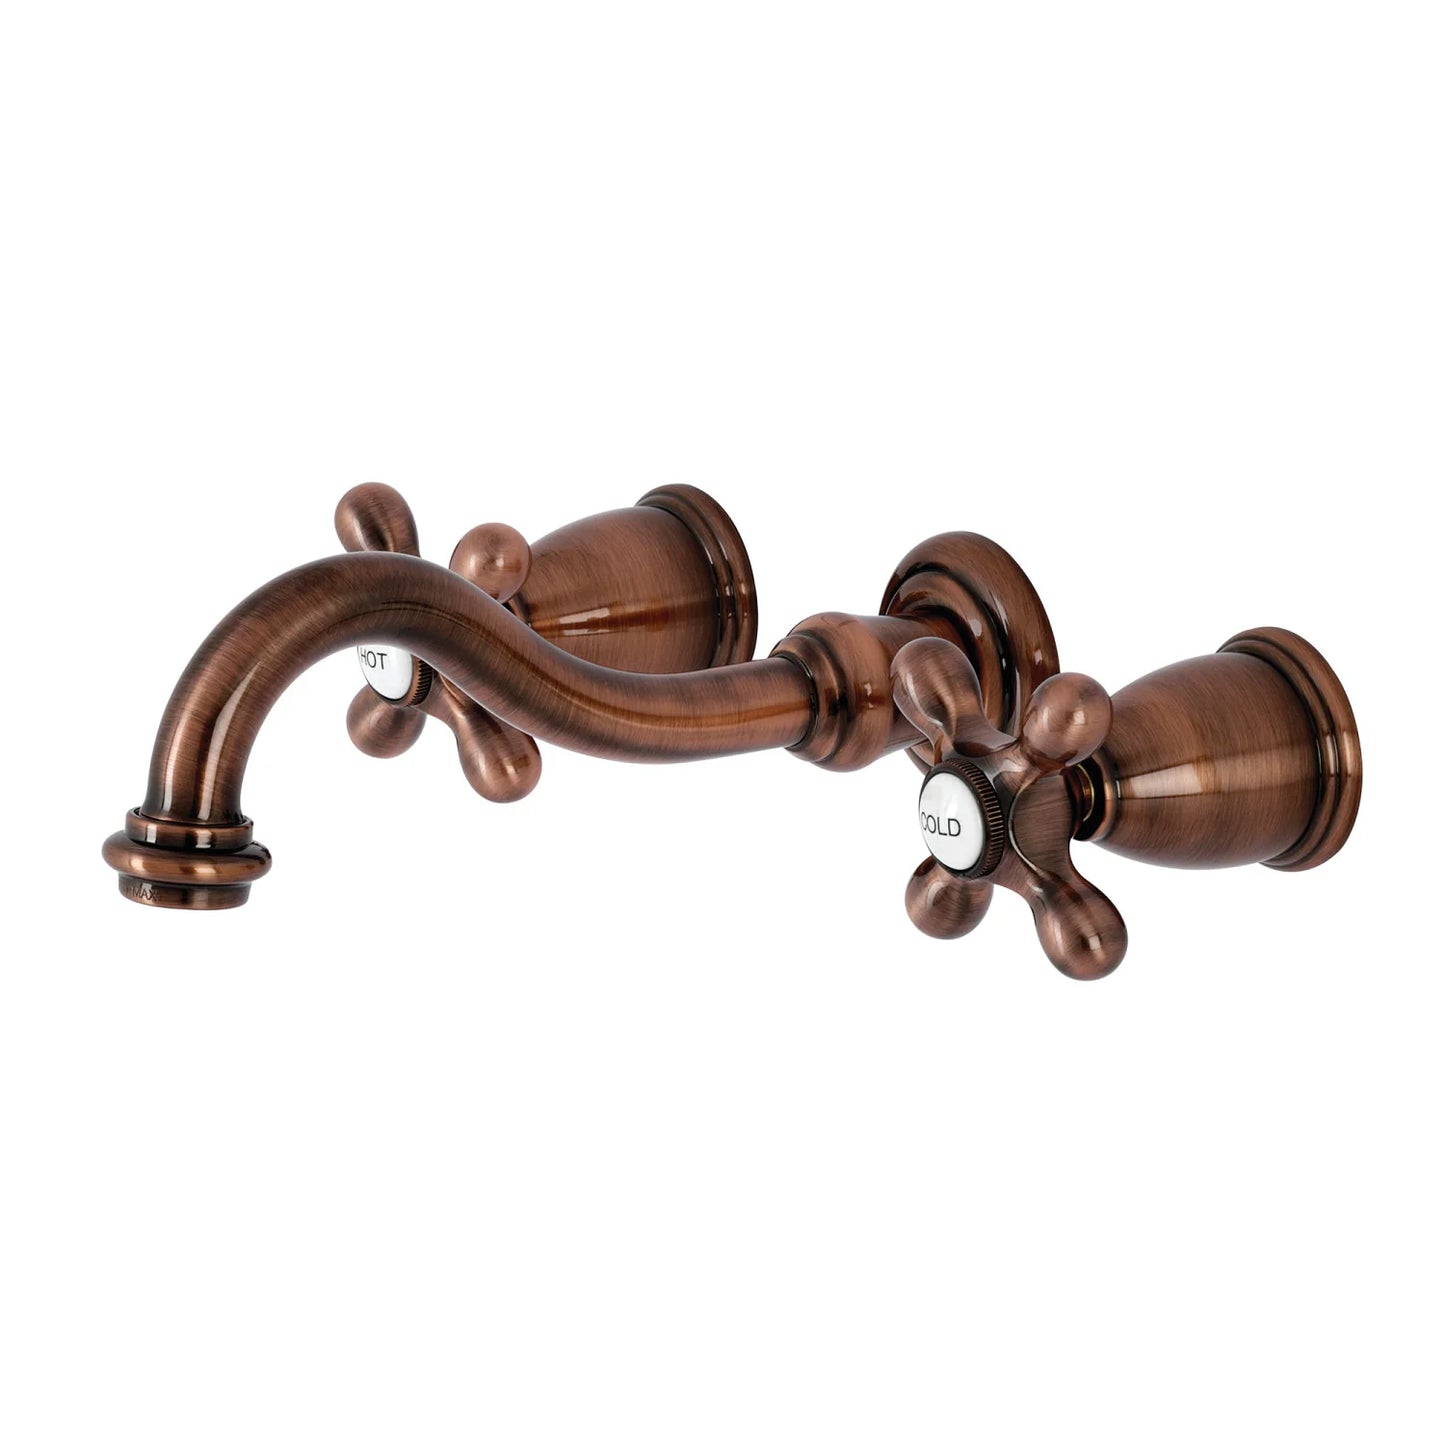 Copy of Vintage 8-Inch Wall Mount Sink Faucet with Cross Handle, Antique Copper